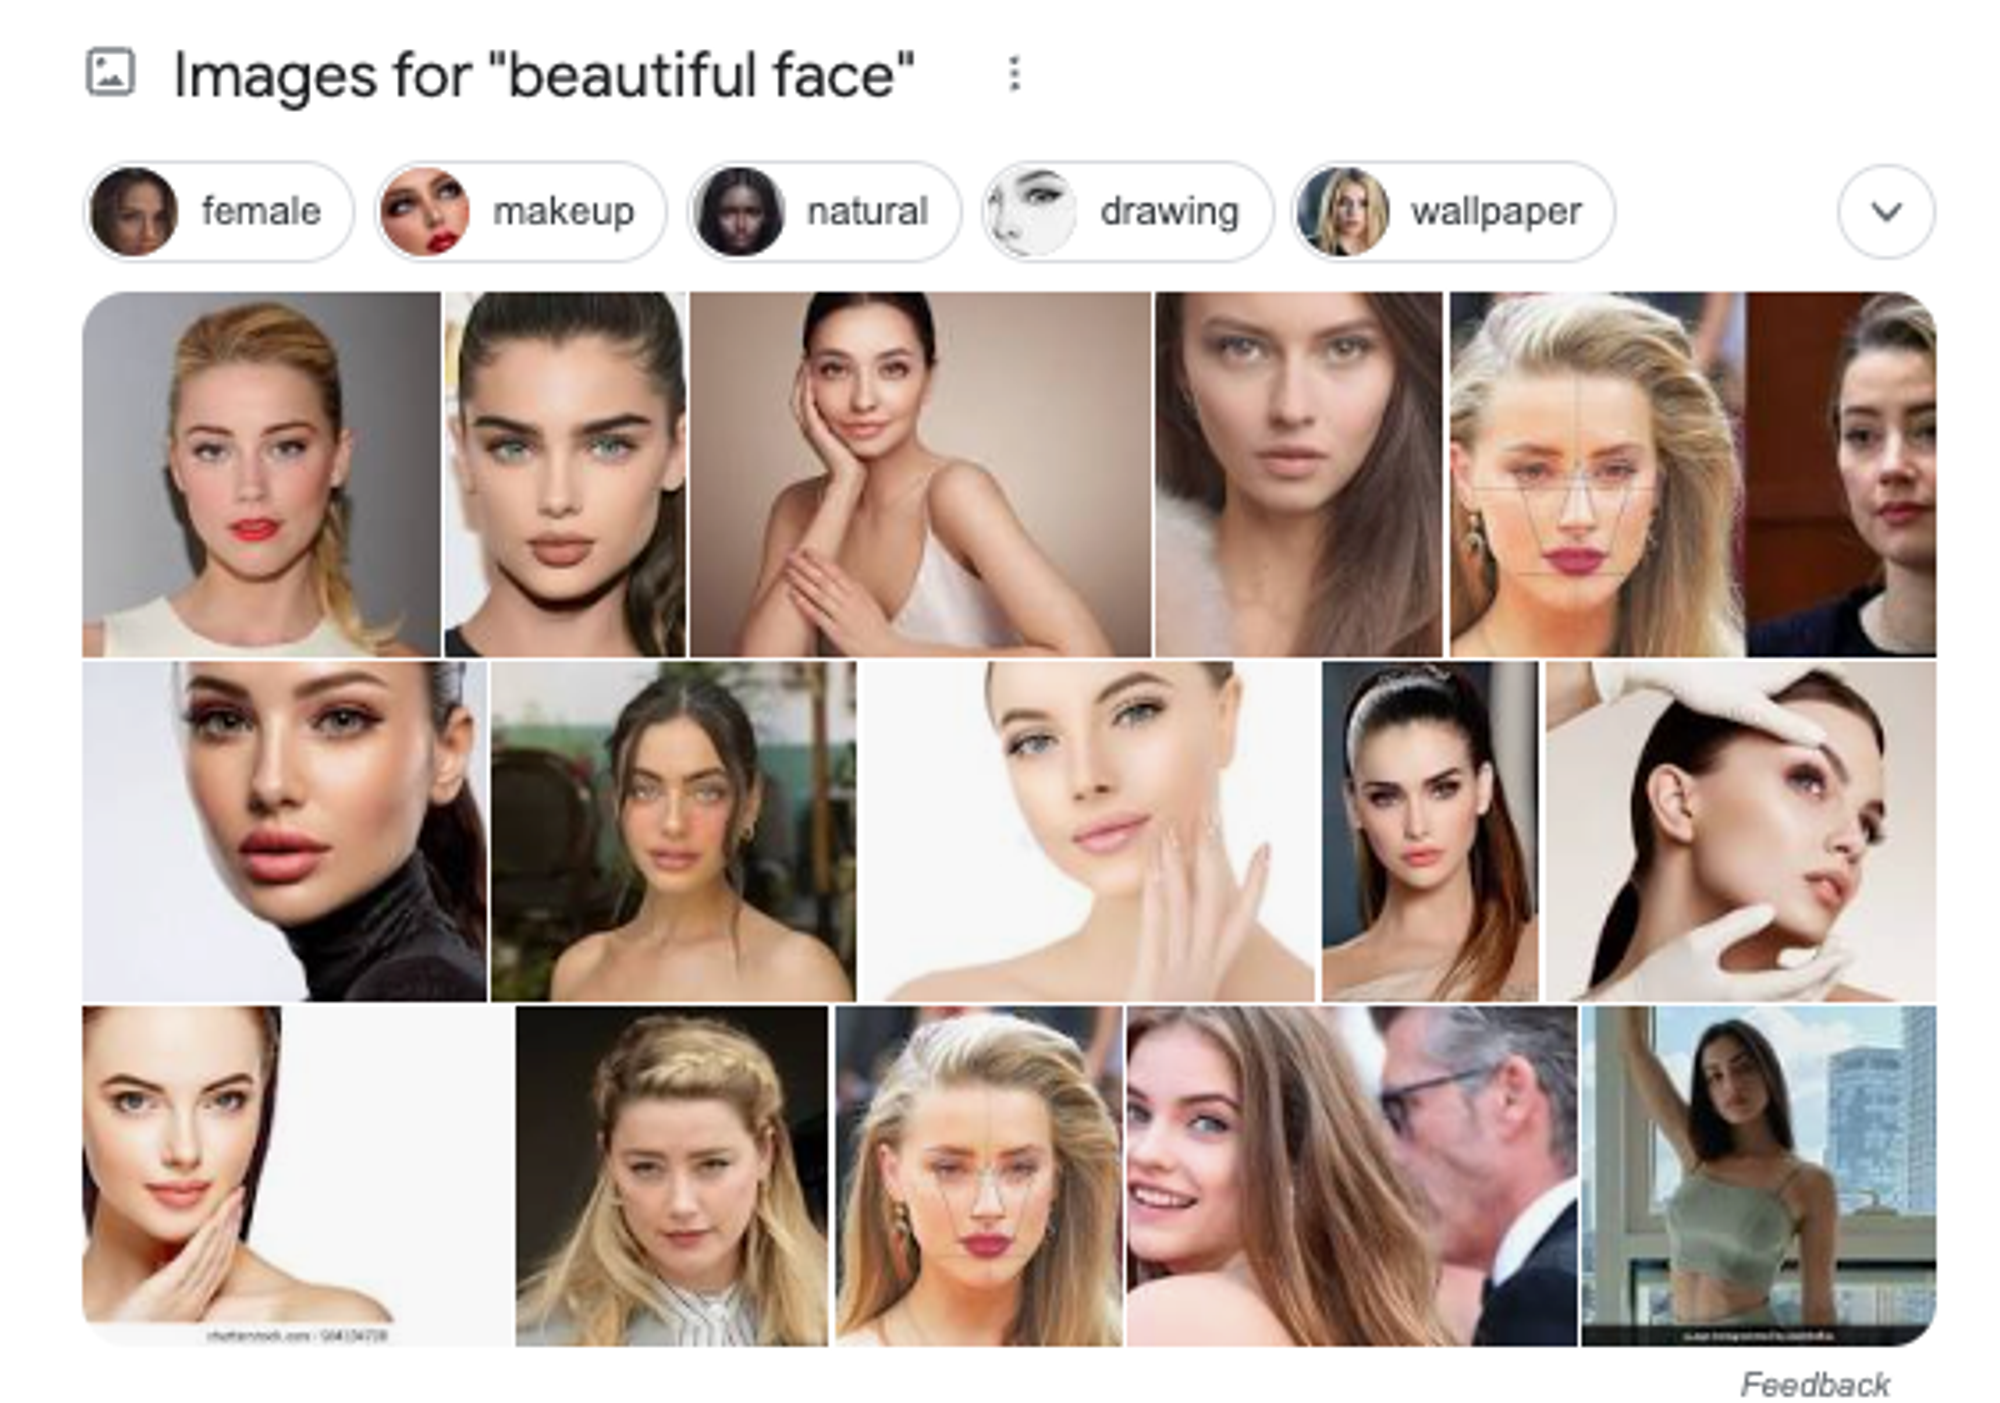 Google Images reflects our cultural biases